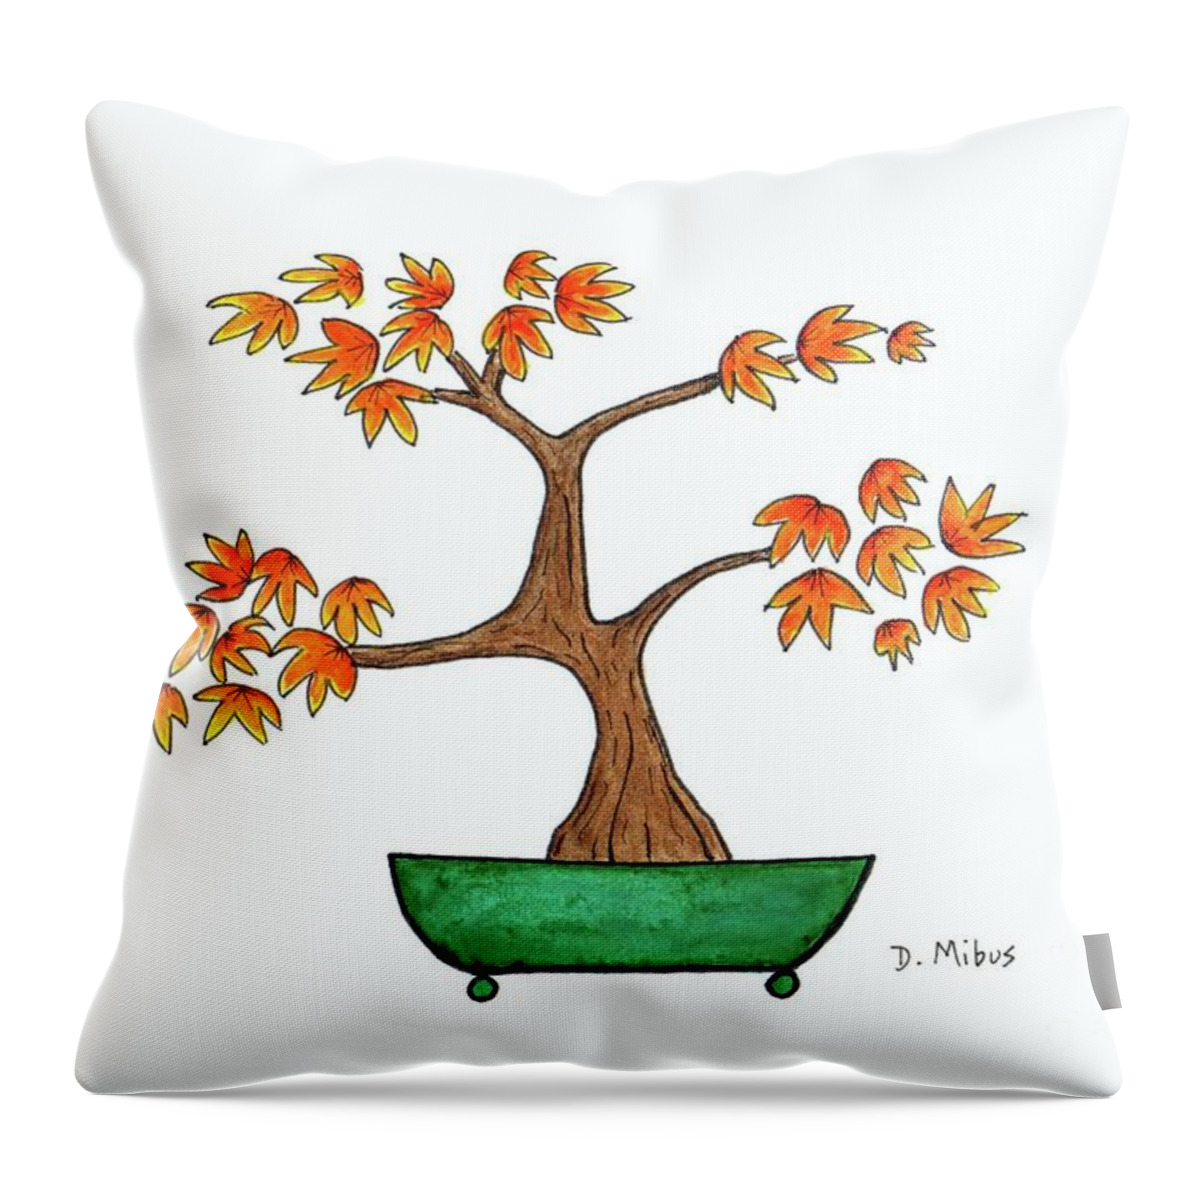 Asian Art Throw Pillow featuring the painting Whimsical Japanese Maple Bonsai Tree by Donna Mibus